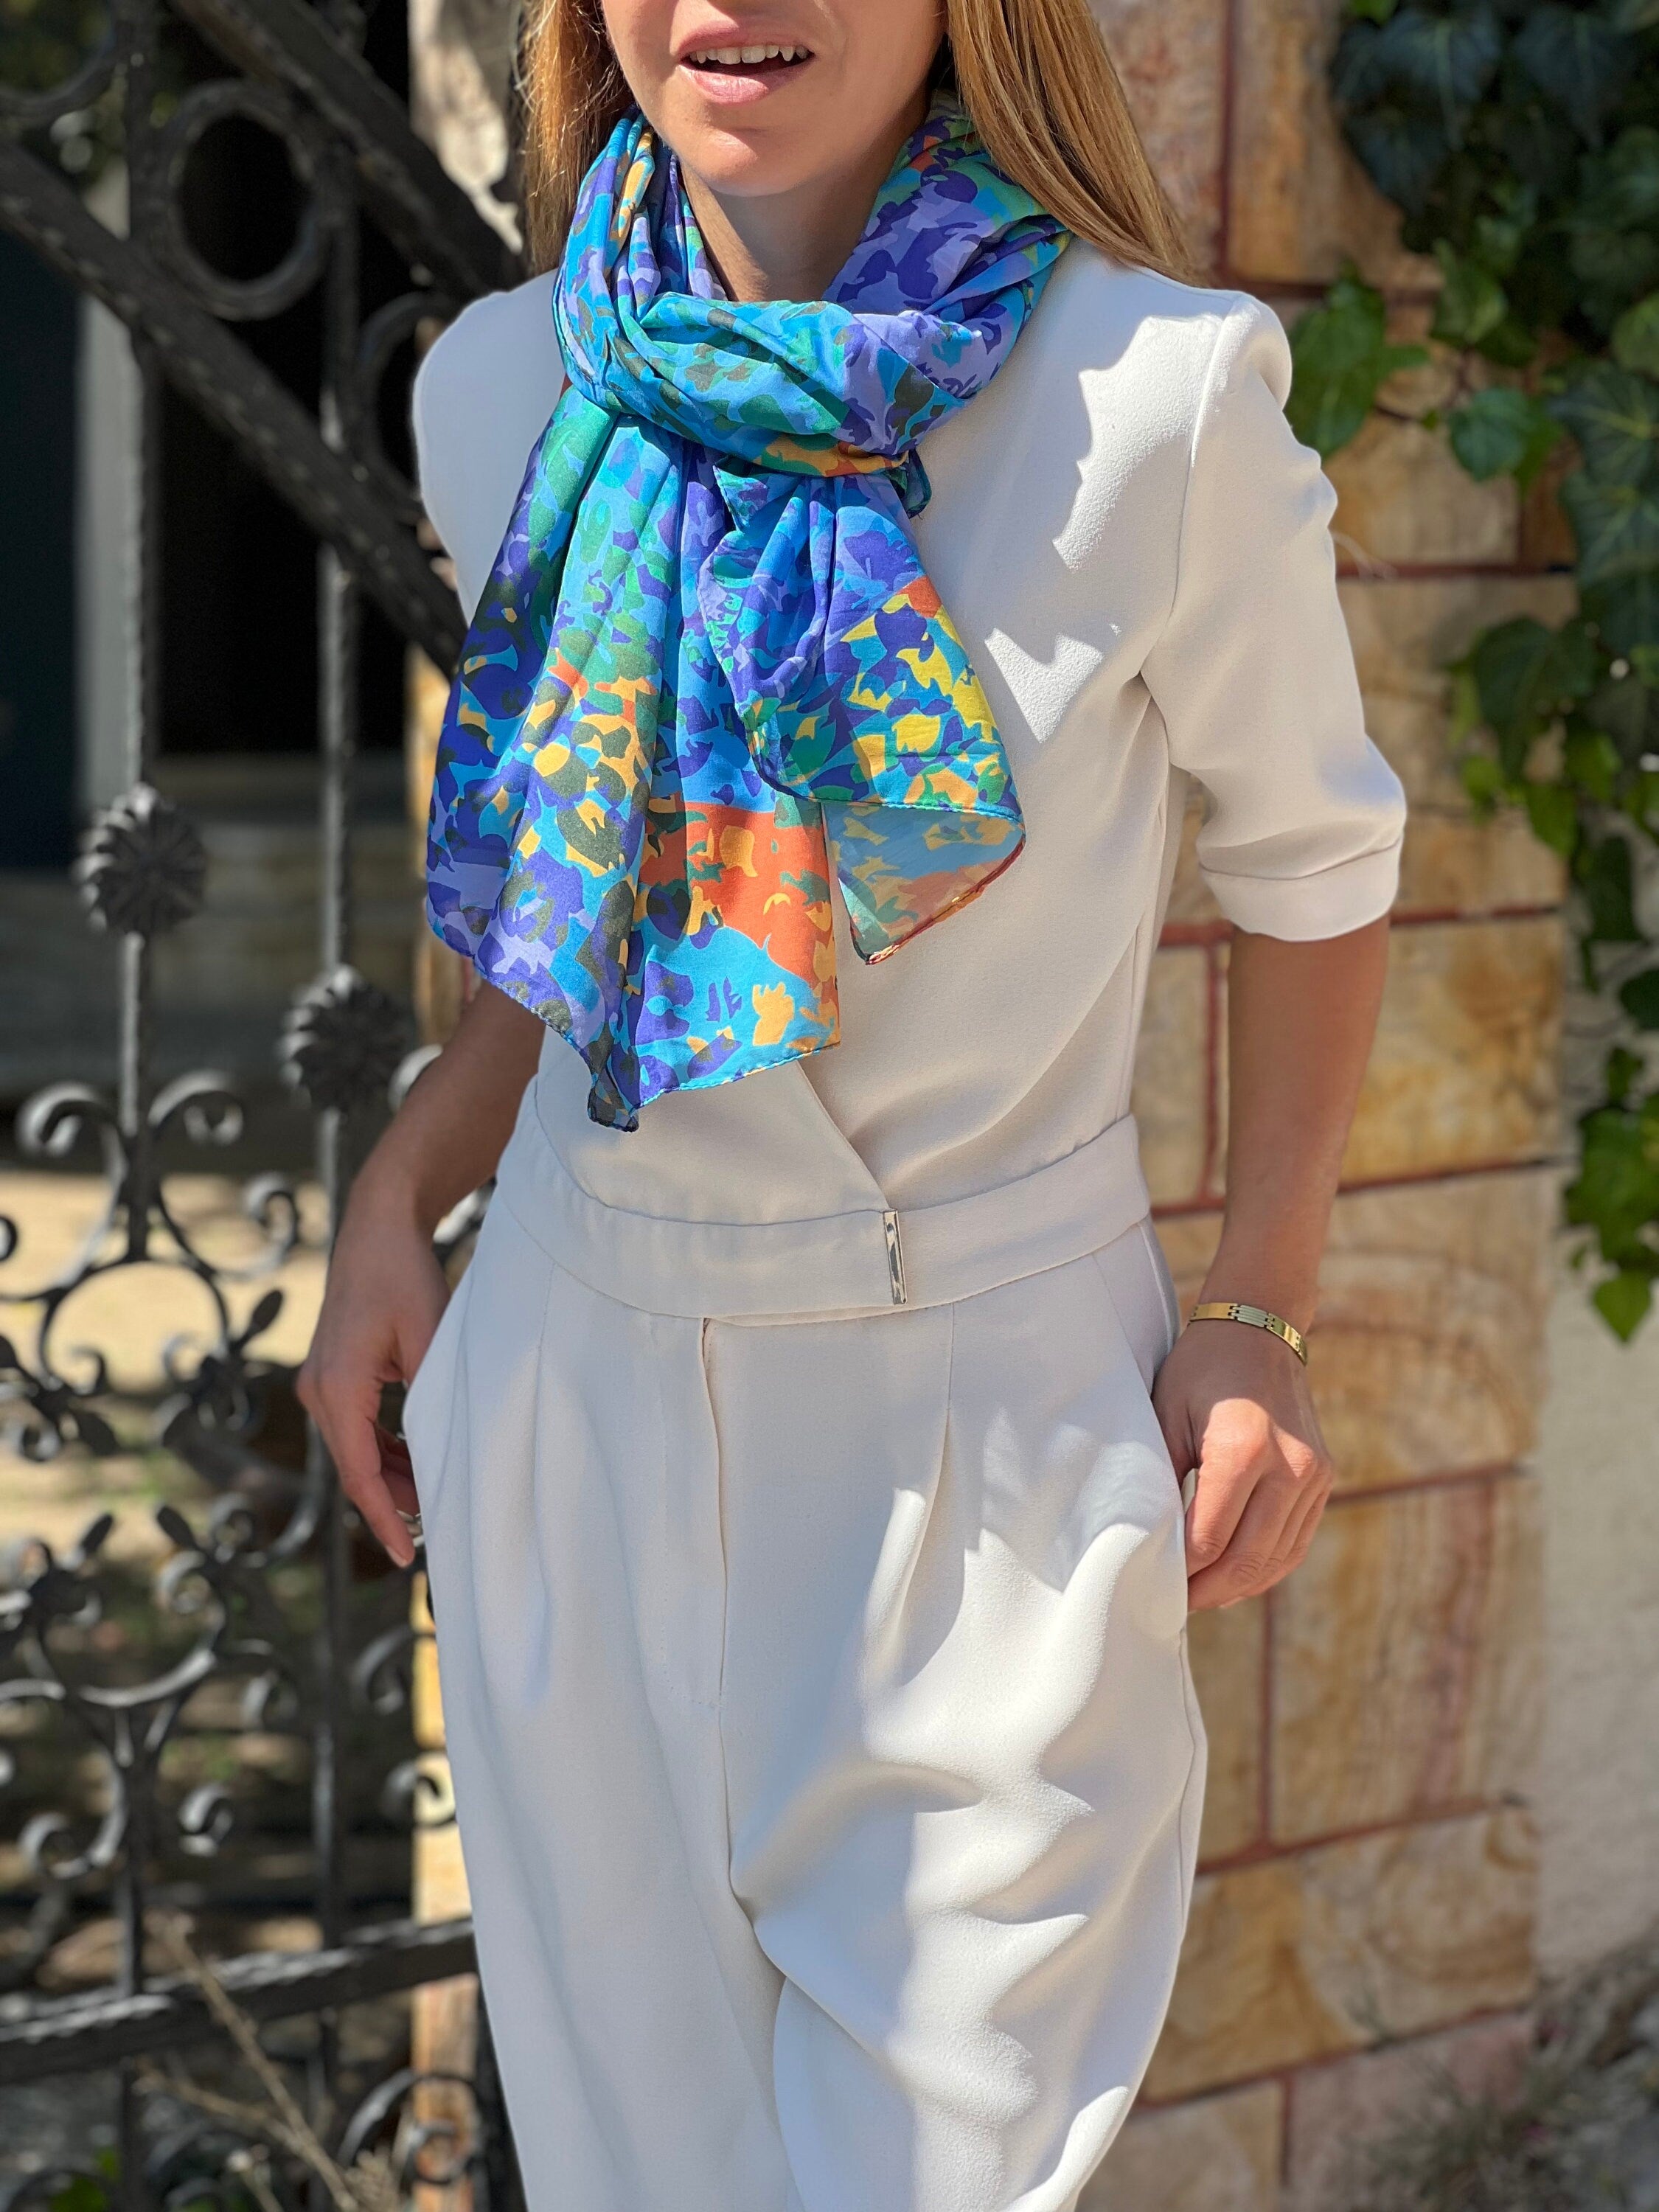 Transform your look with this stylish Cotton Viscose blend voile rectangle scarf. Suitable for spring and autumn, this lightweight scarf features a delicate and airy fabric that adds a touch of sophistication to any outfit.